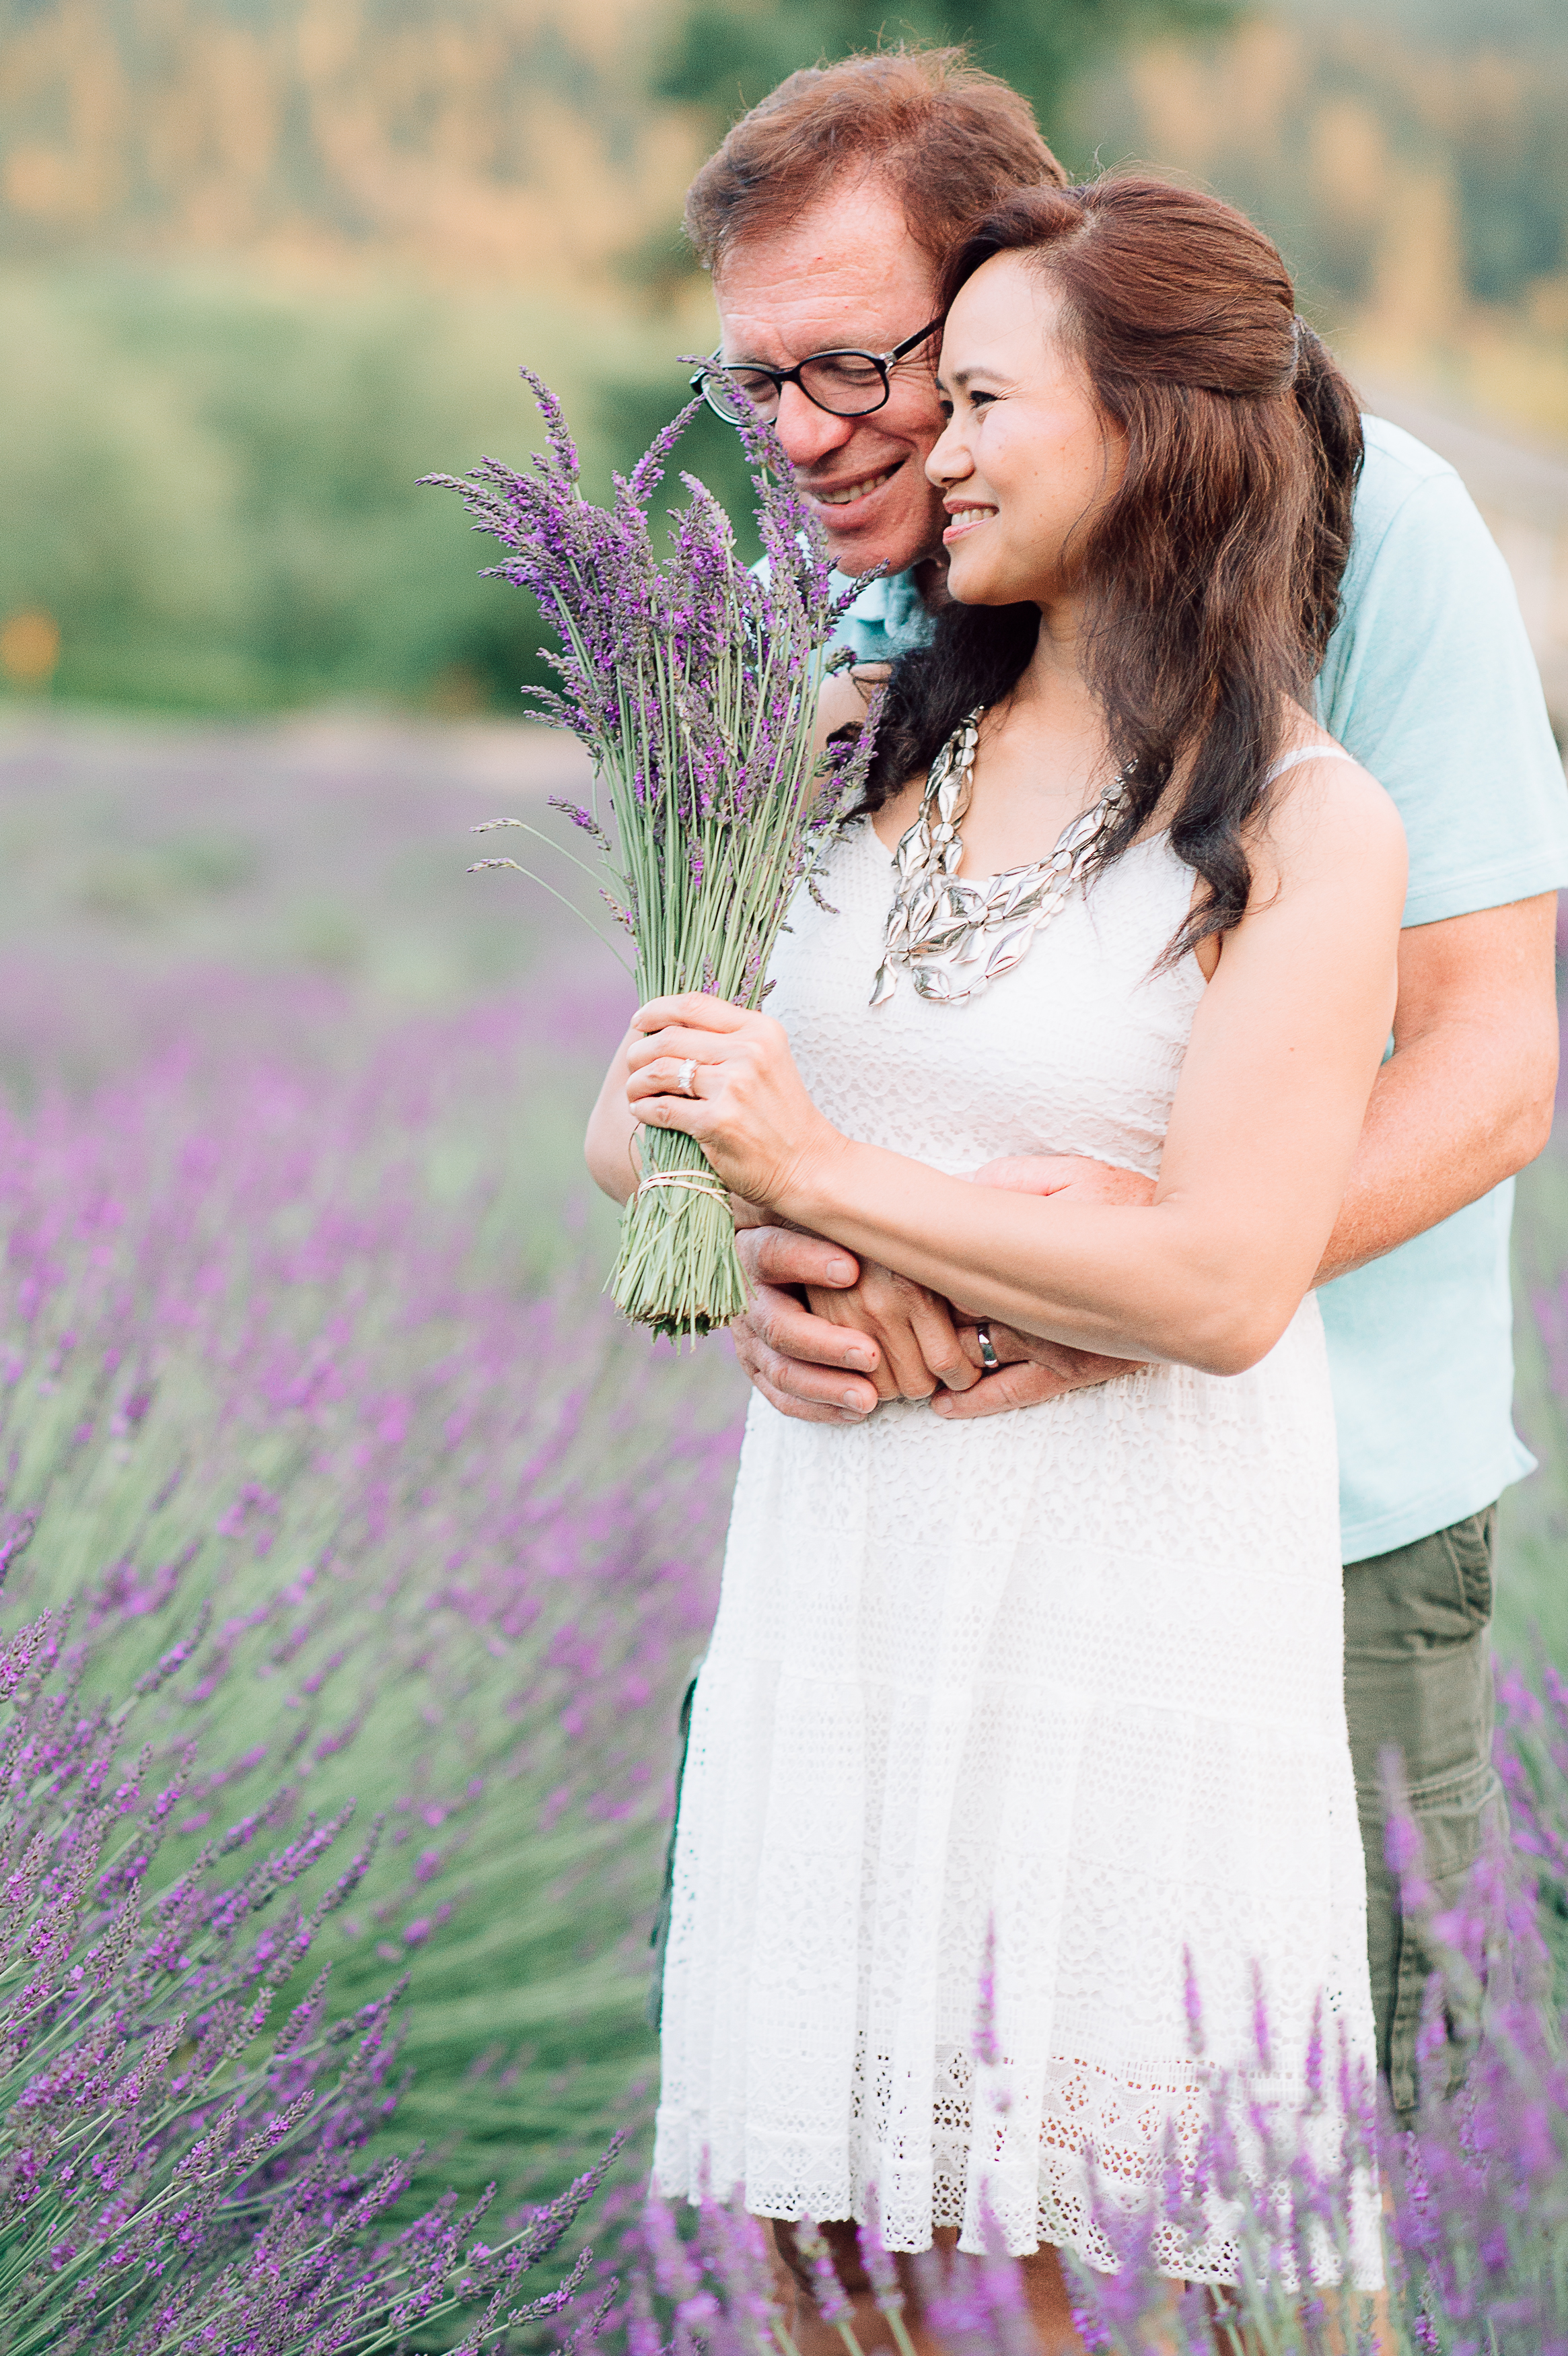 engagement_lavenderfield_youseephotography_LidiaOtto (70).jpg